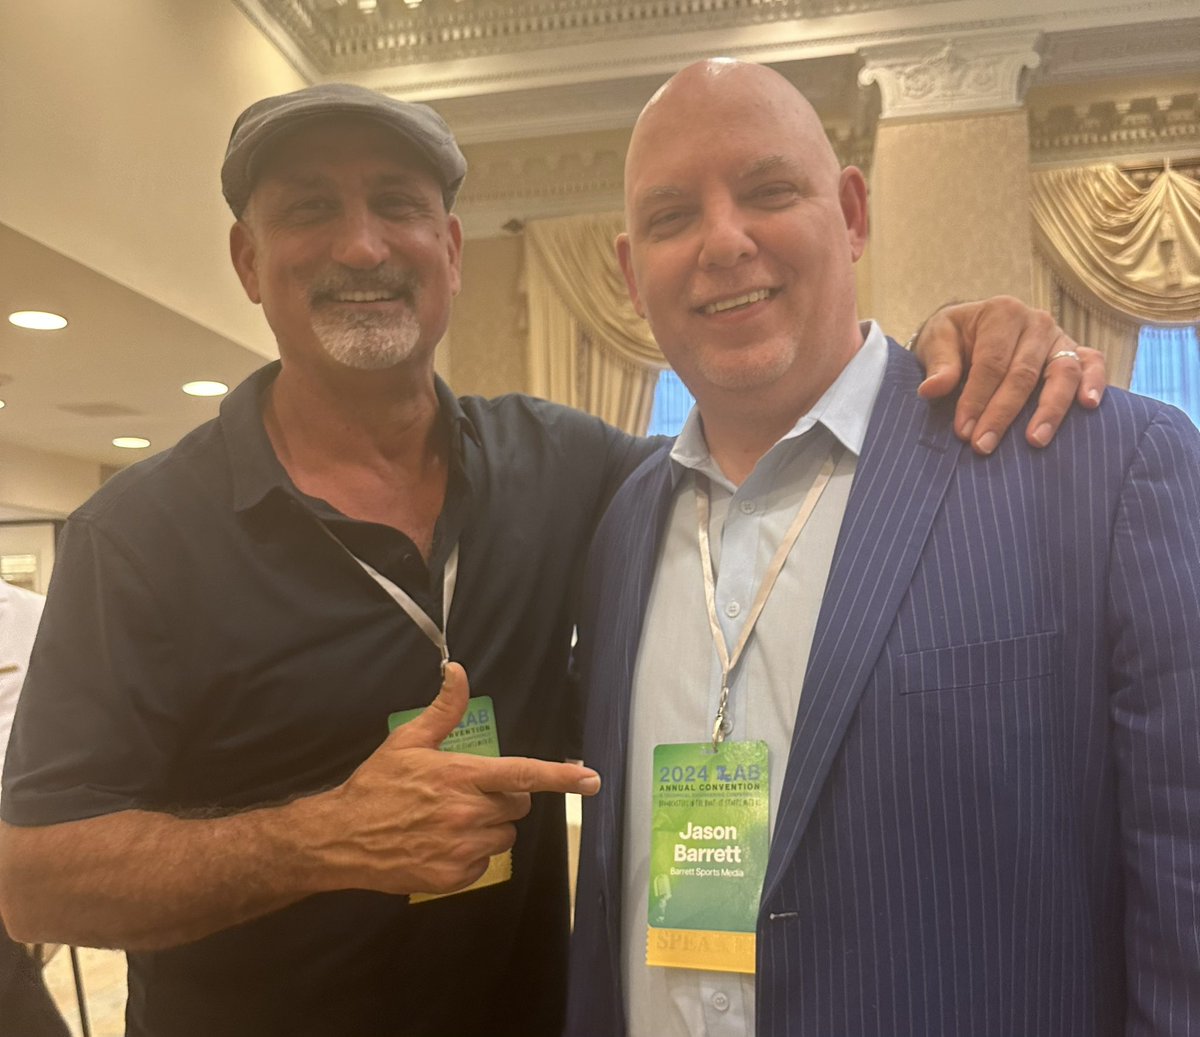 Great time in New Orleans speaking at the Louisiana Association of Broadcasters Annual Convention. Good to see @MattMoscona @glrush3 @FlynnFoster and meet @MichaelPapajohn, and enjoy some good eating.